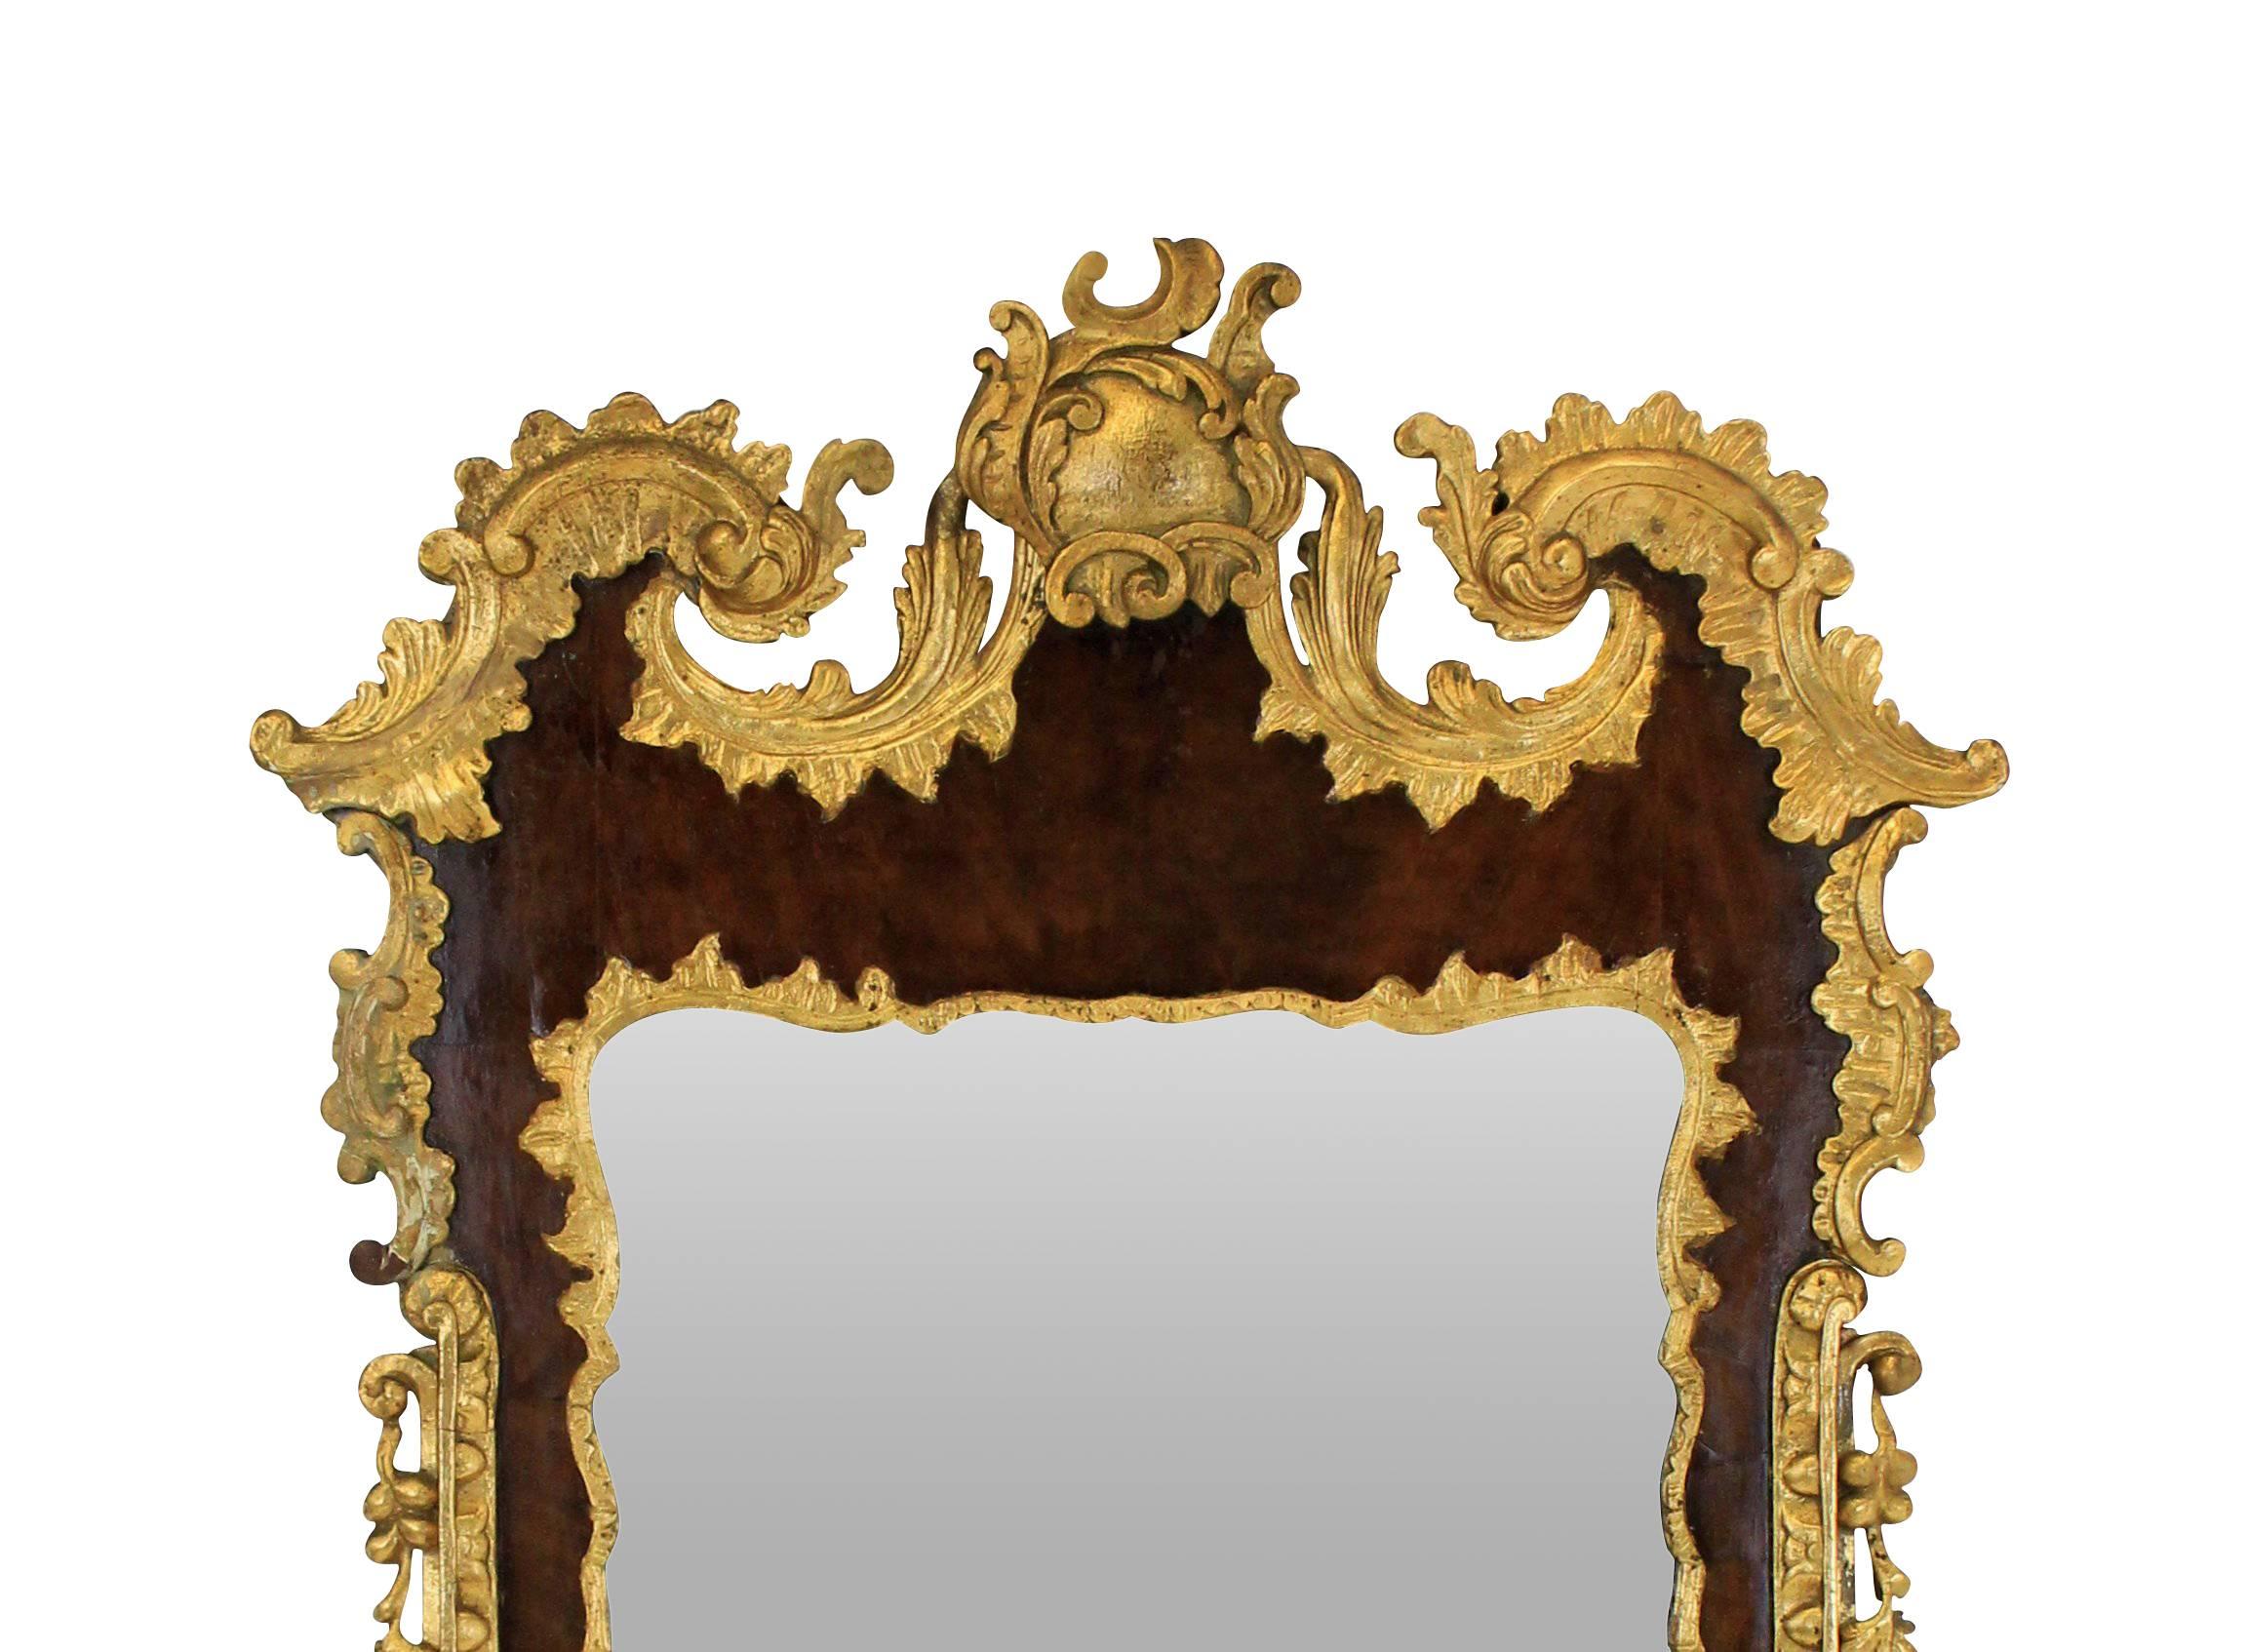 A fine English George III style walnut and parcel gilded mirror, with its original bevelled mirror plate.